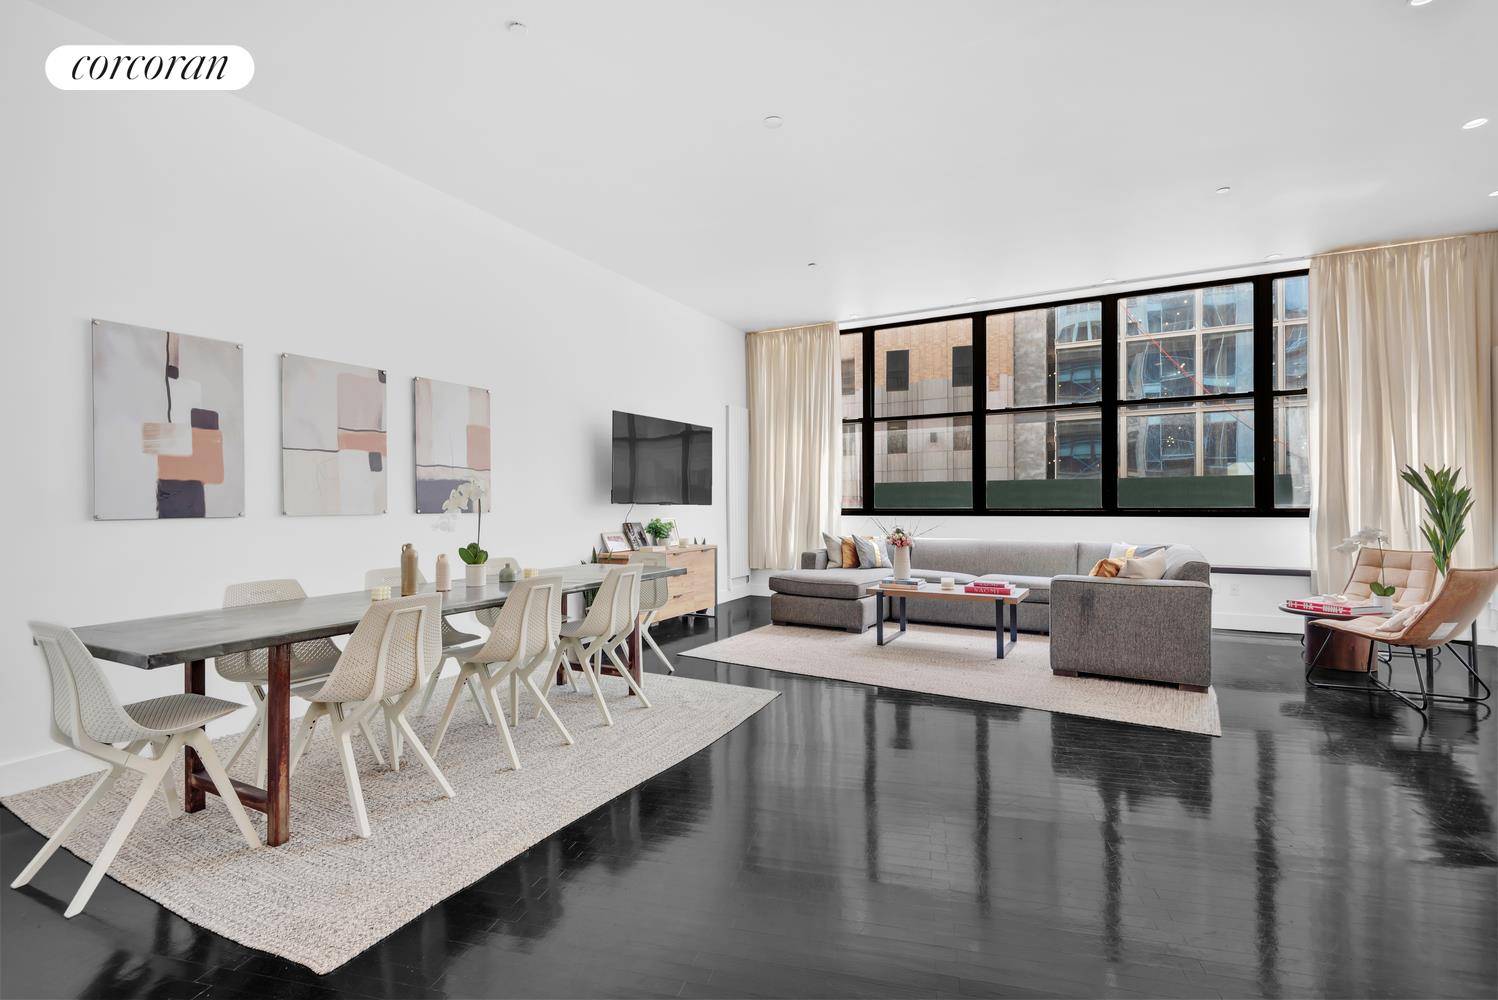 Loft 2 at 133 West 14th Street is a luxury downtown full floor 2, 200 square foot home with private keyed elevator entry featuring three bedrooms, two and a half ...